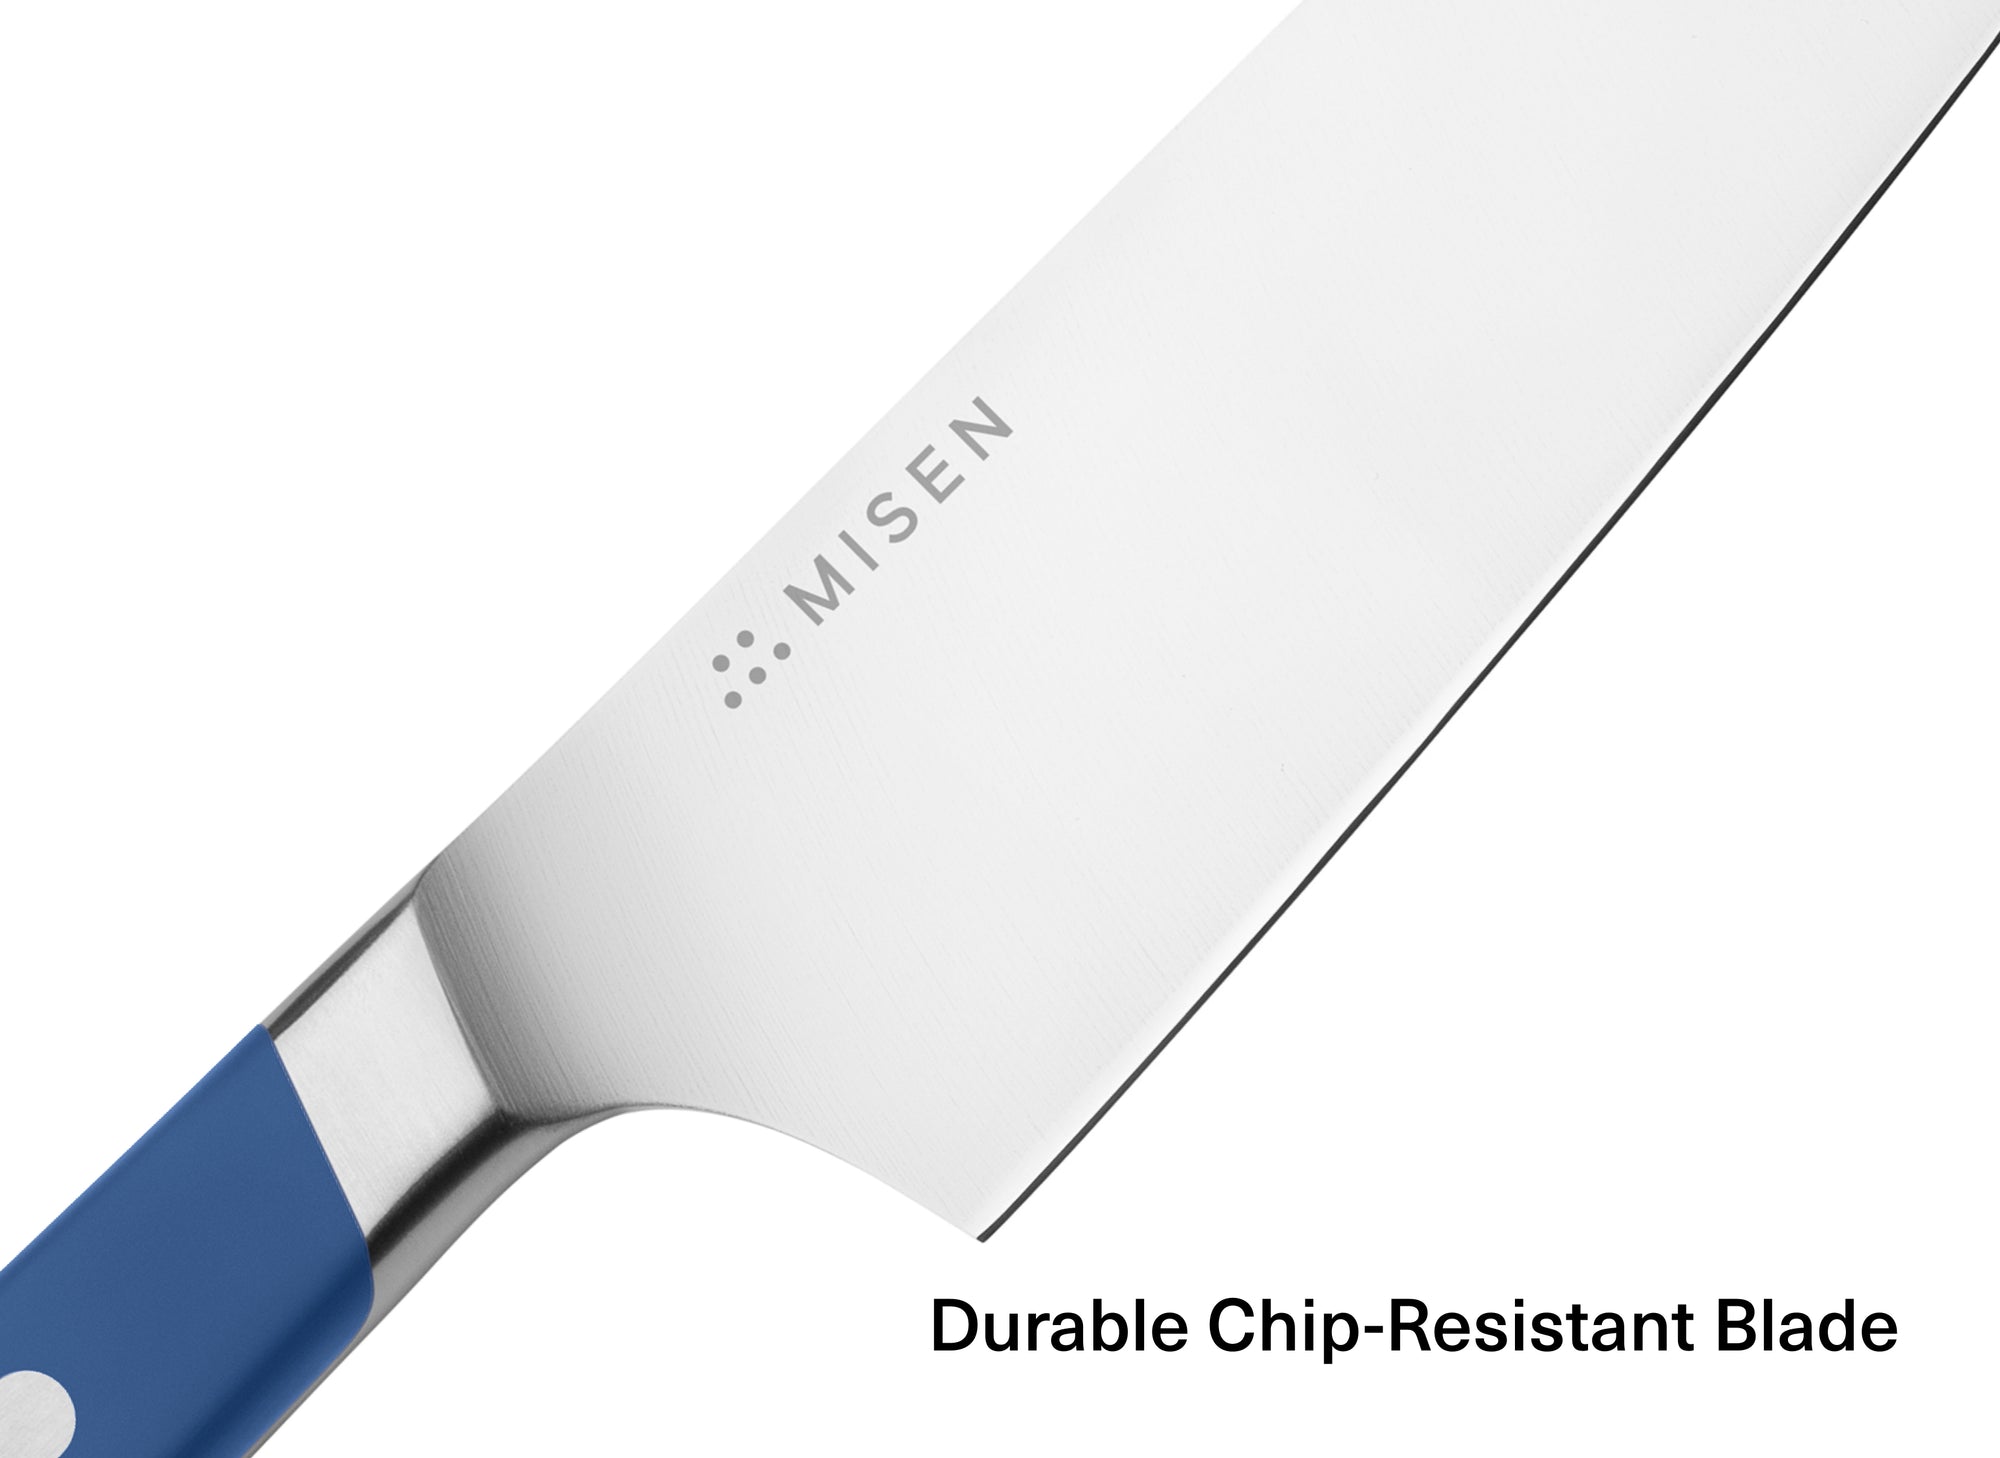 The Misen Chef's Knife features a durable chip-resistant blade.